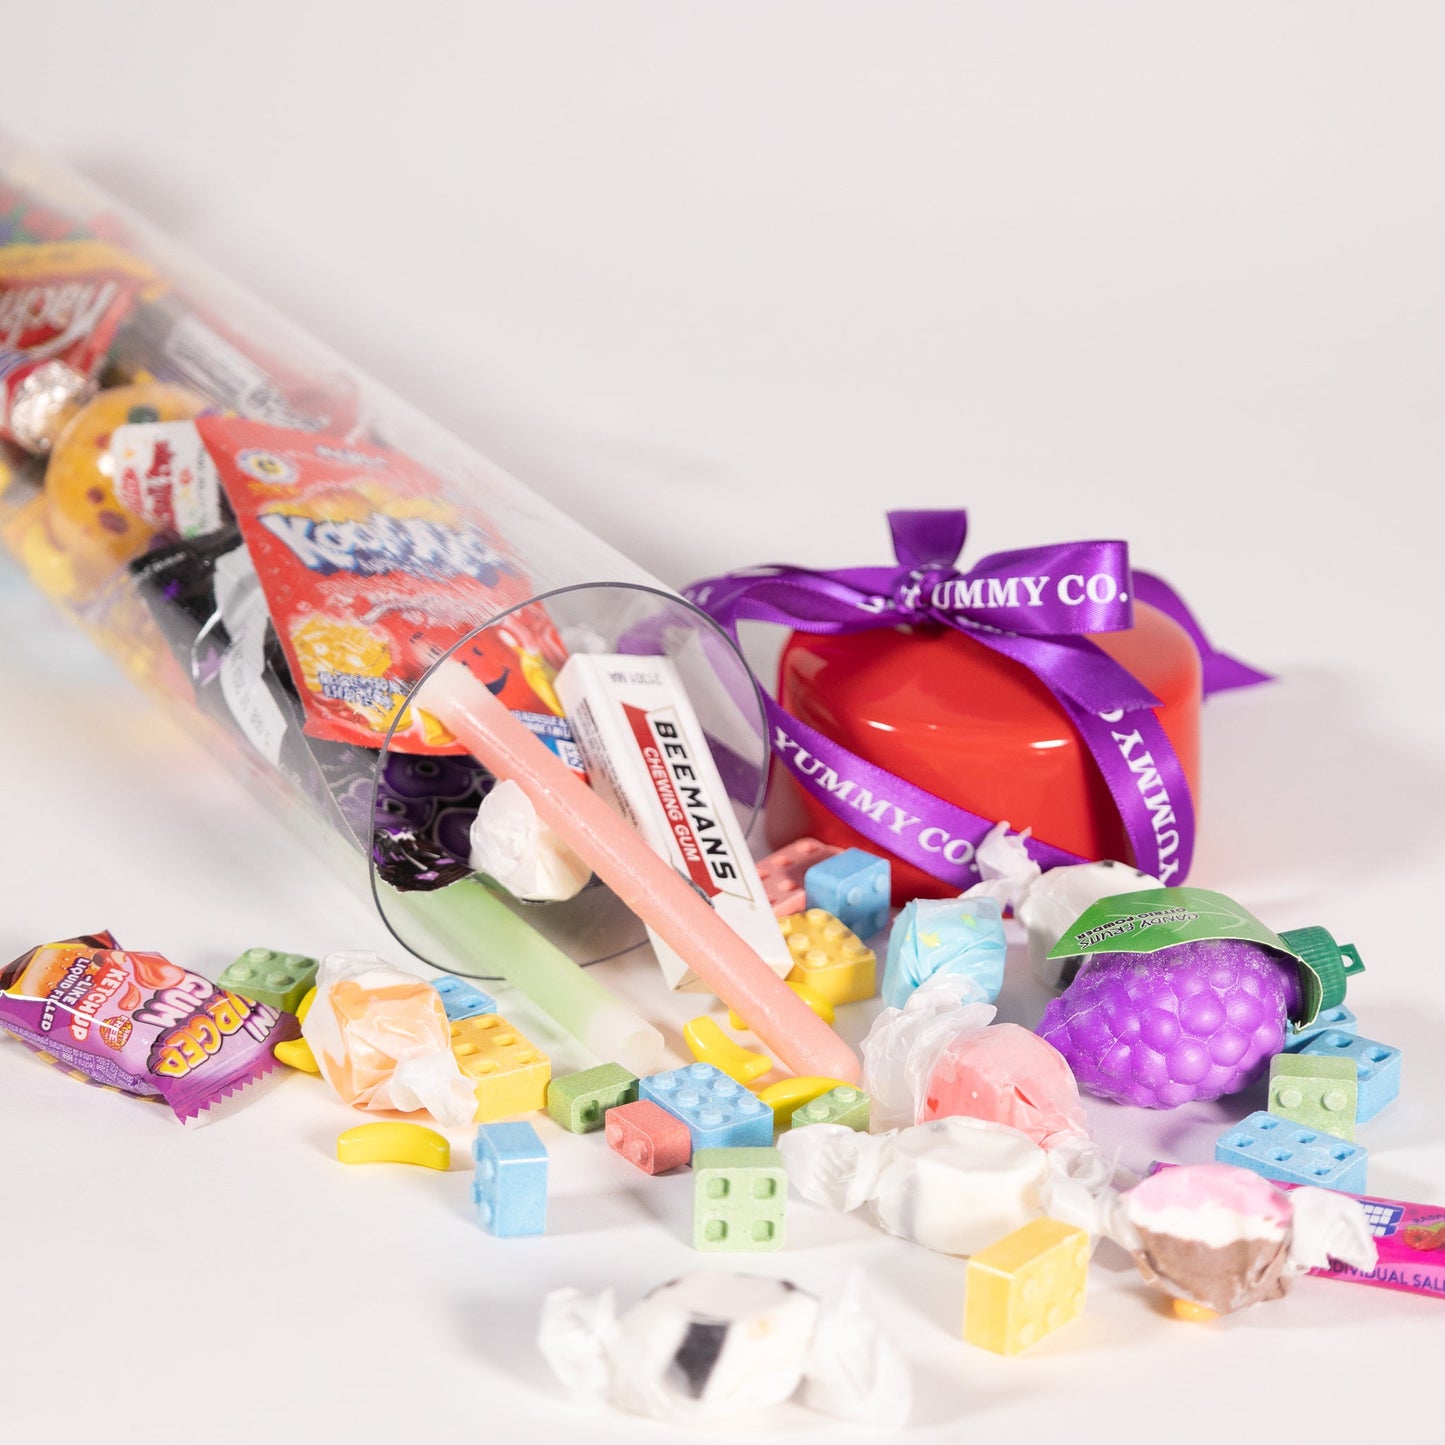 1970s Candy Time Capsule